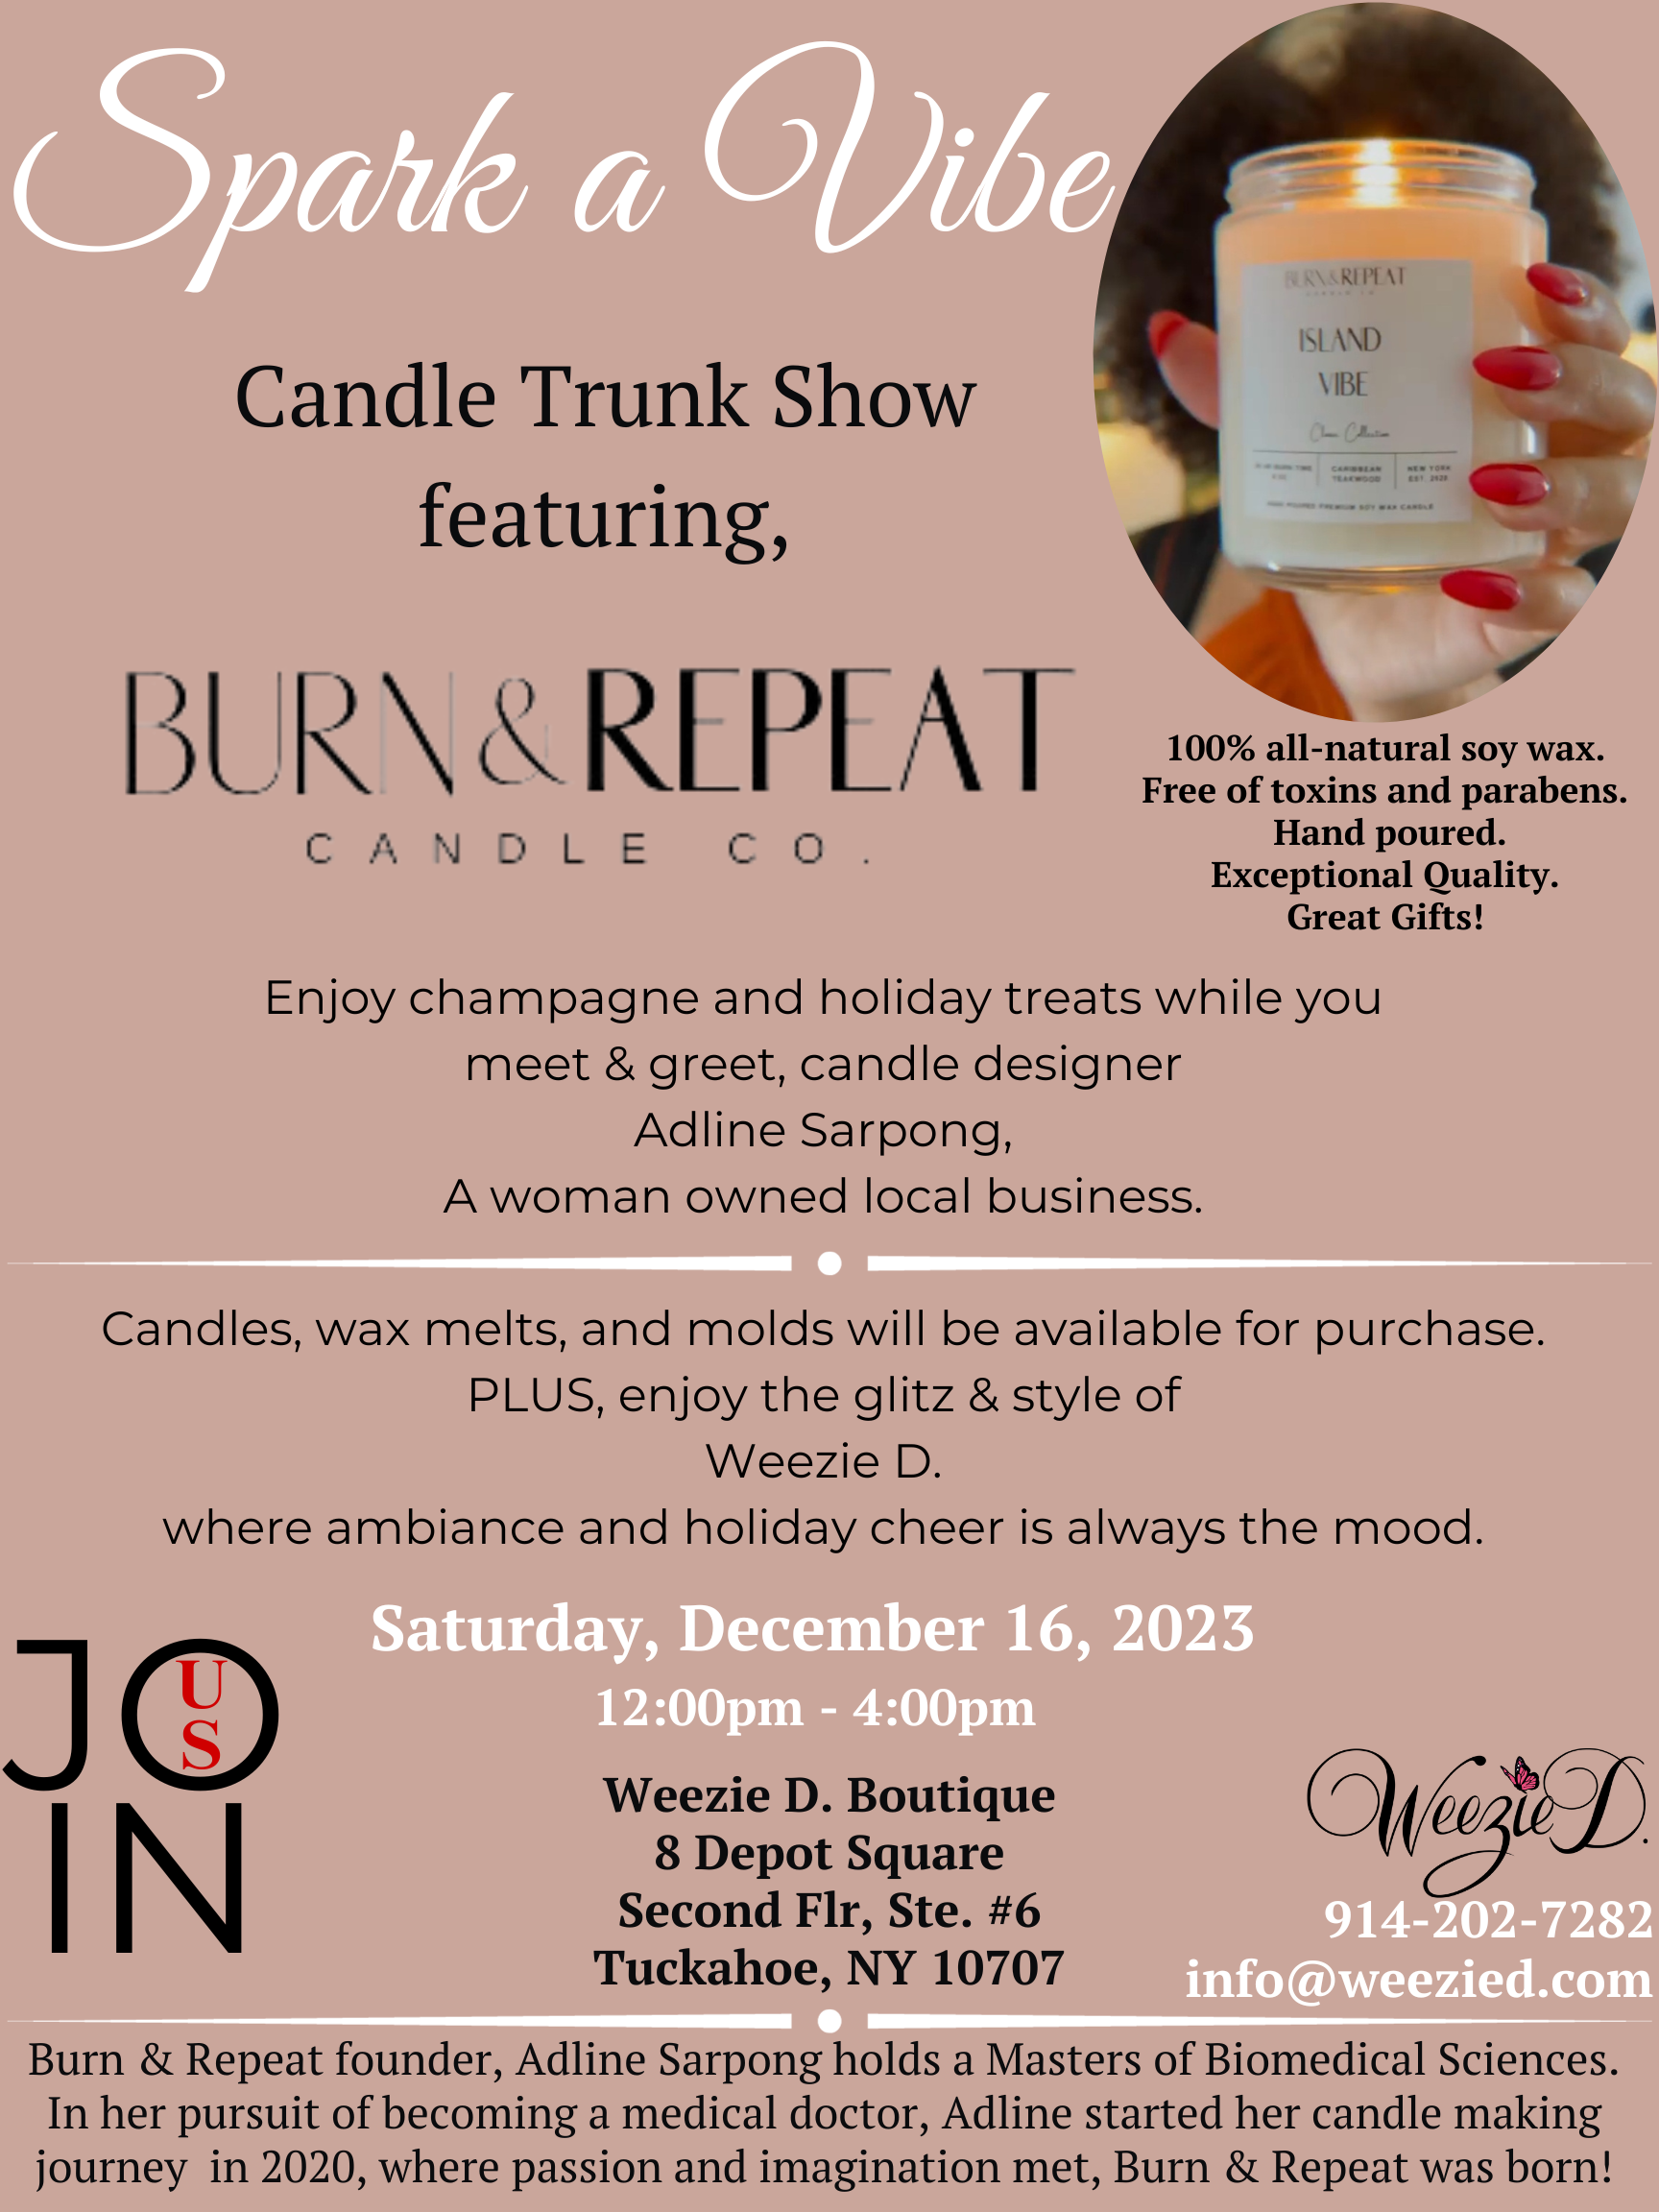 Spark A Vibe Candle Trunk Show